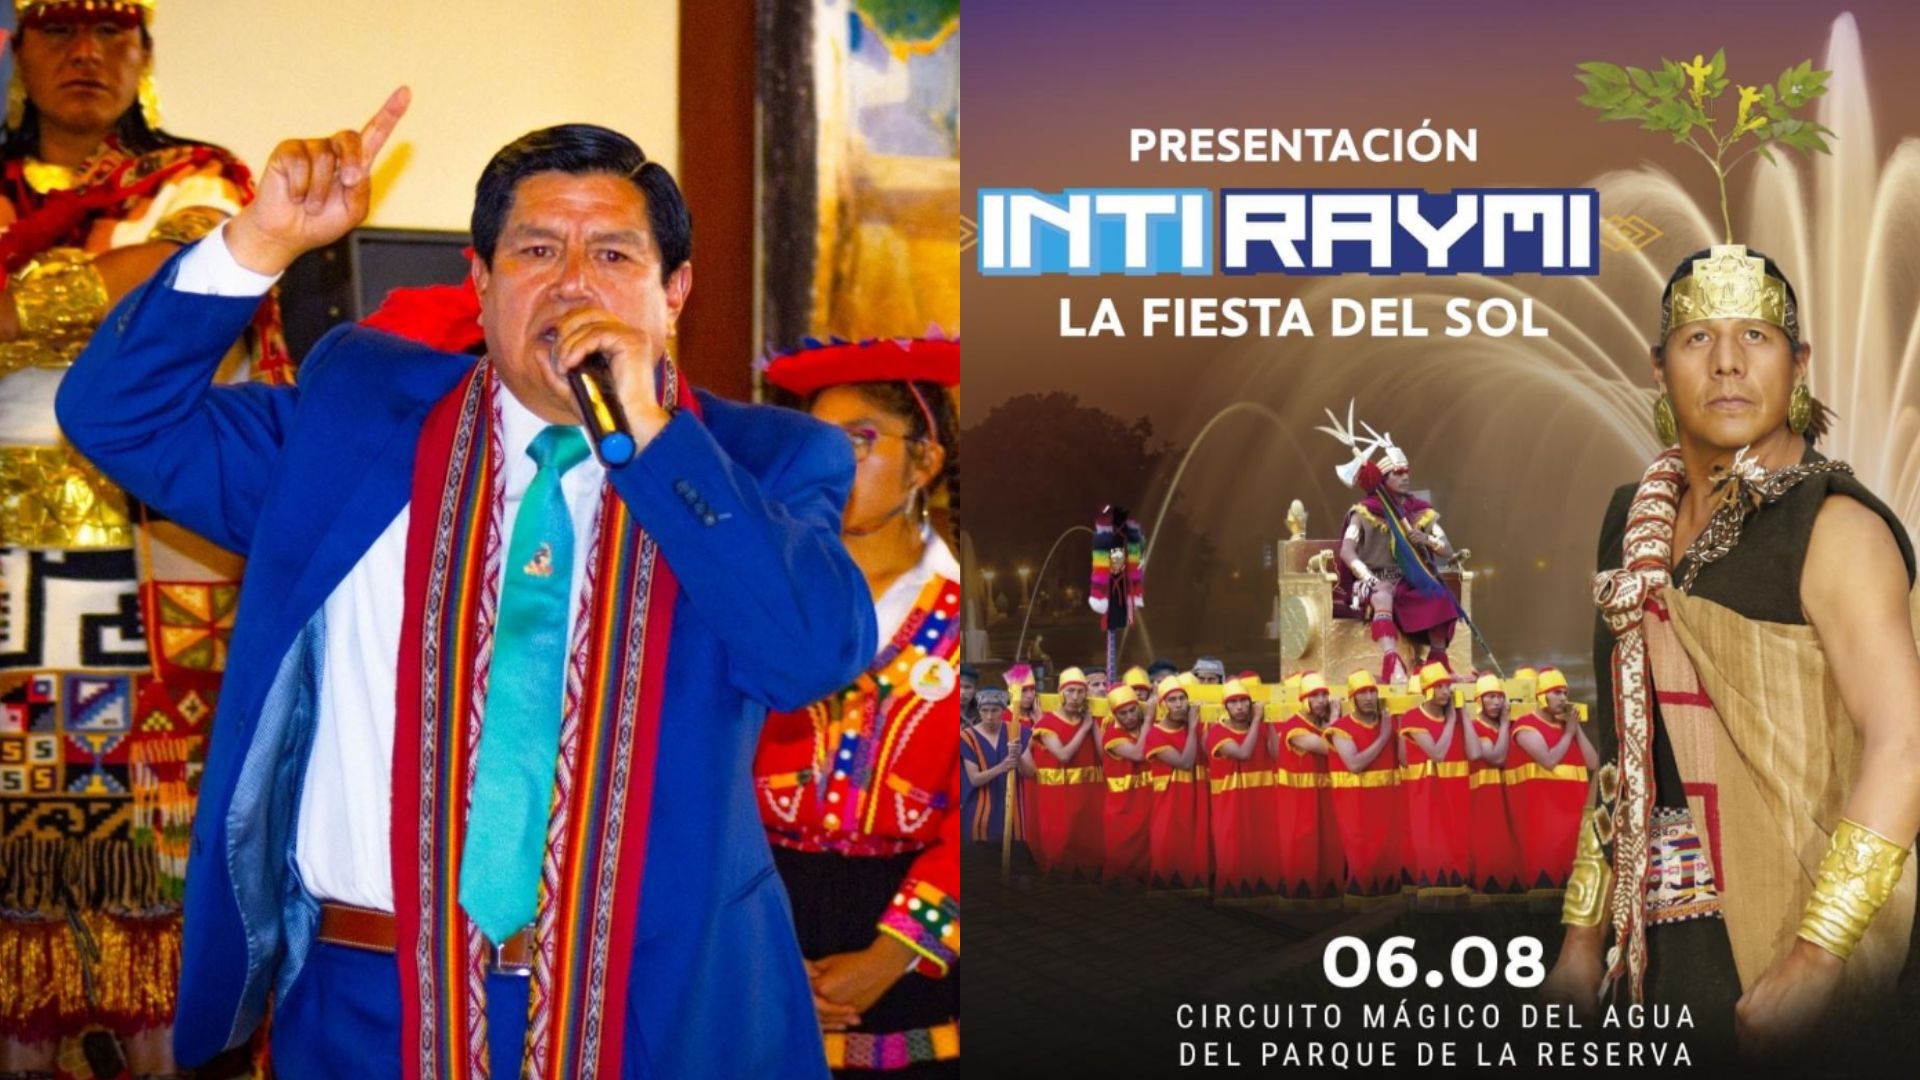 Despite the preparations made and the tickets sold, the cultural event in the Parque de la Reserva will not take place.